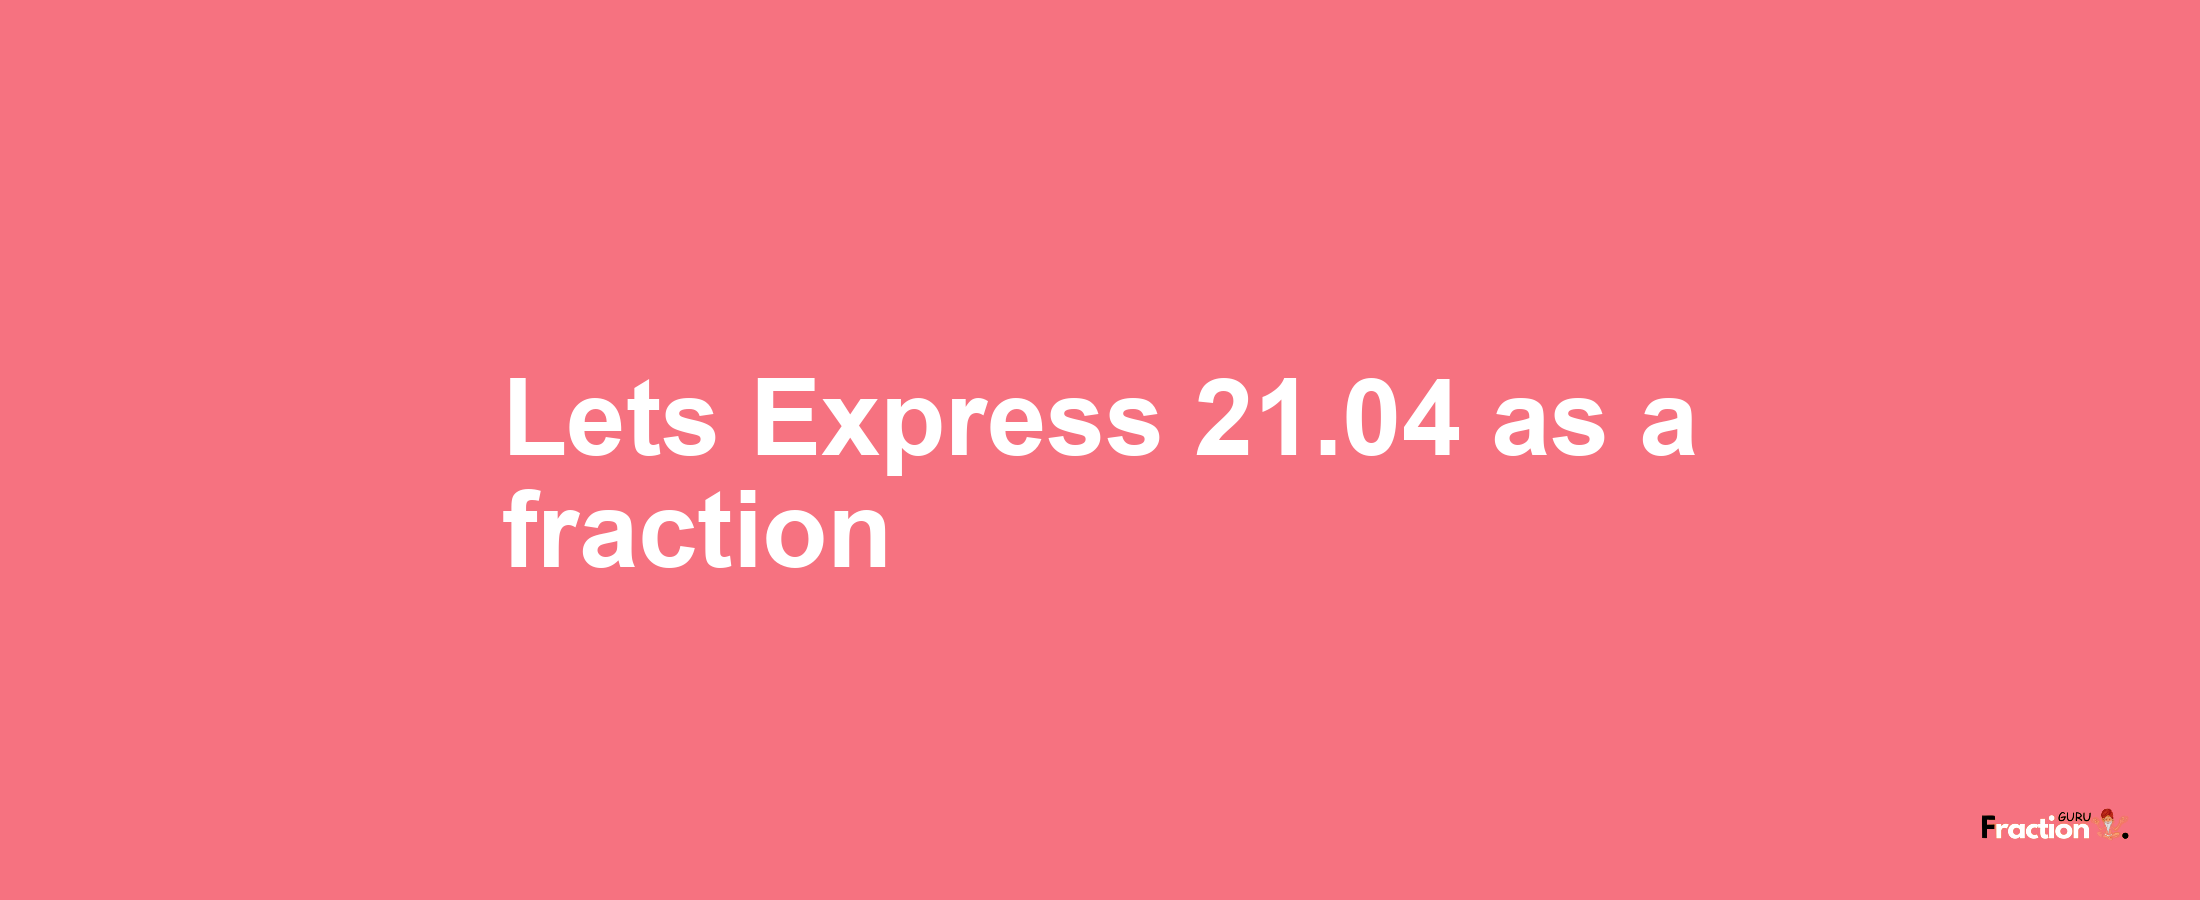 Lets Express 21.04 as afraction